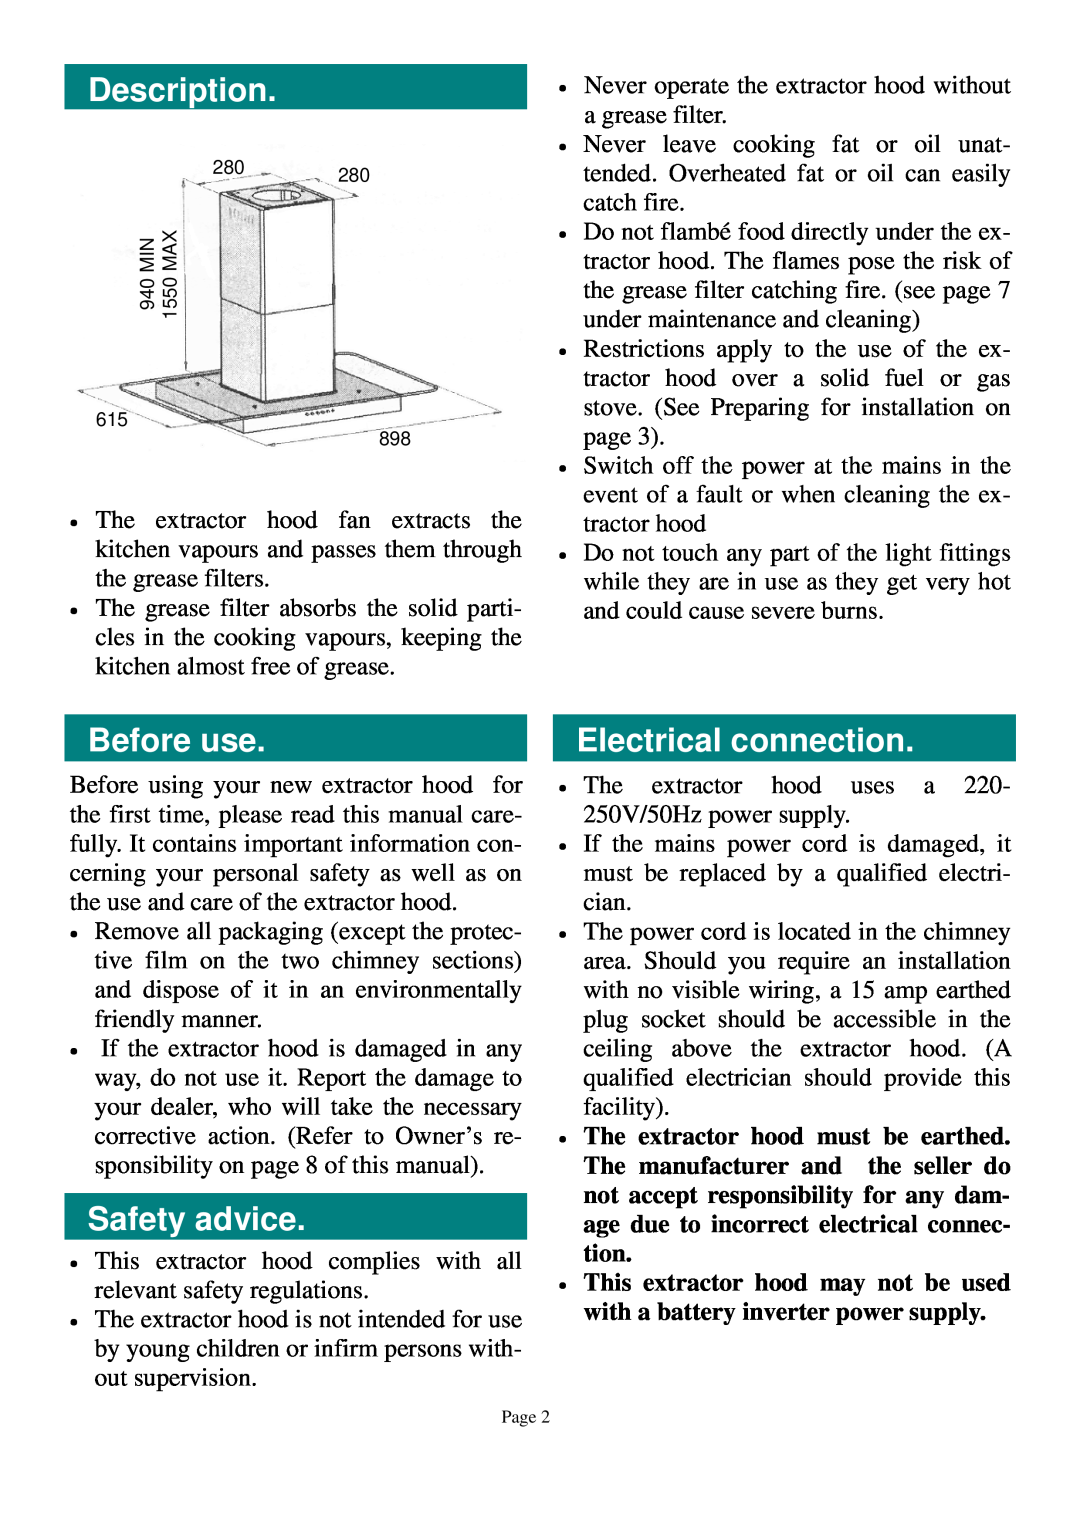 Defy Appliances DCH262 owner manual Description, Before use, Safety advice, Electrical connection 